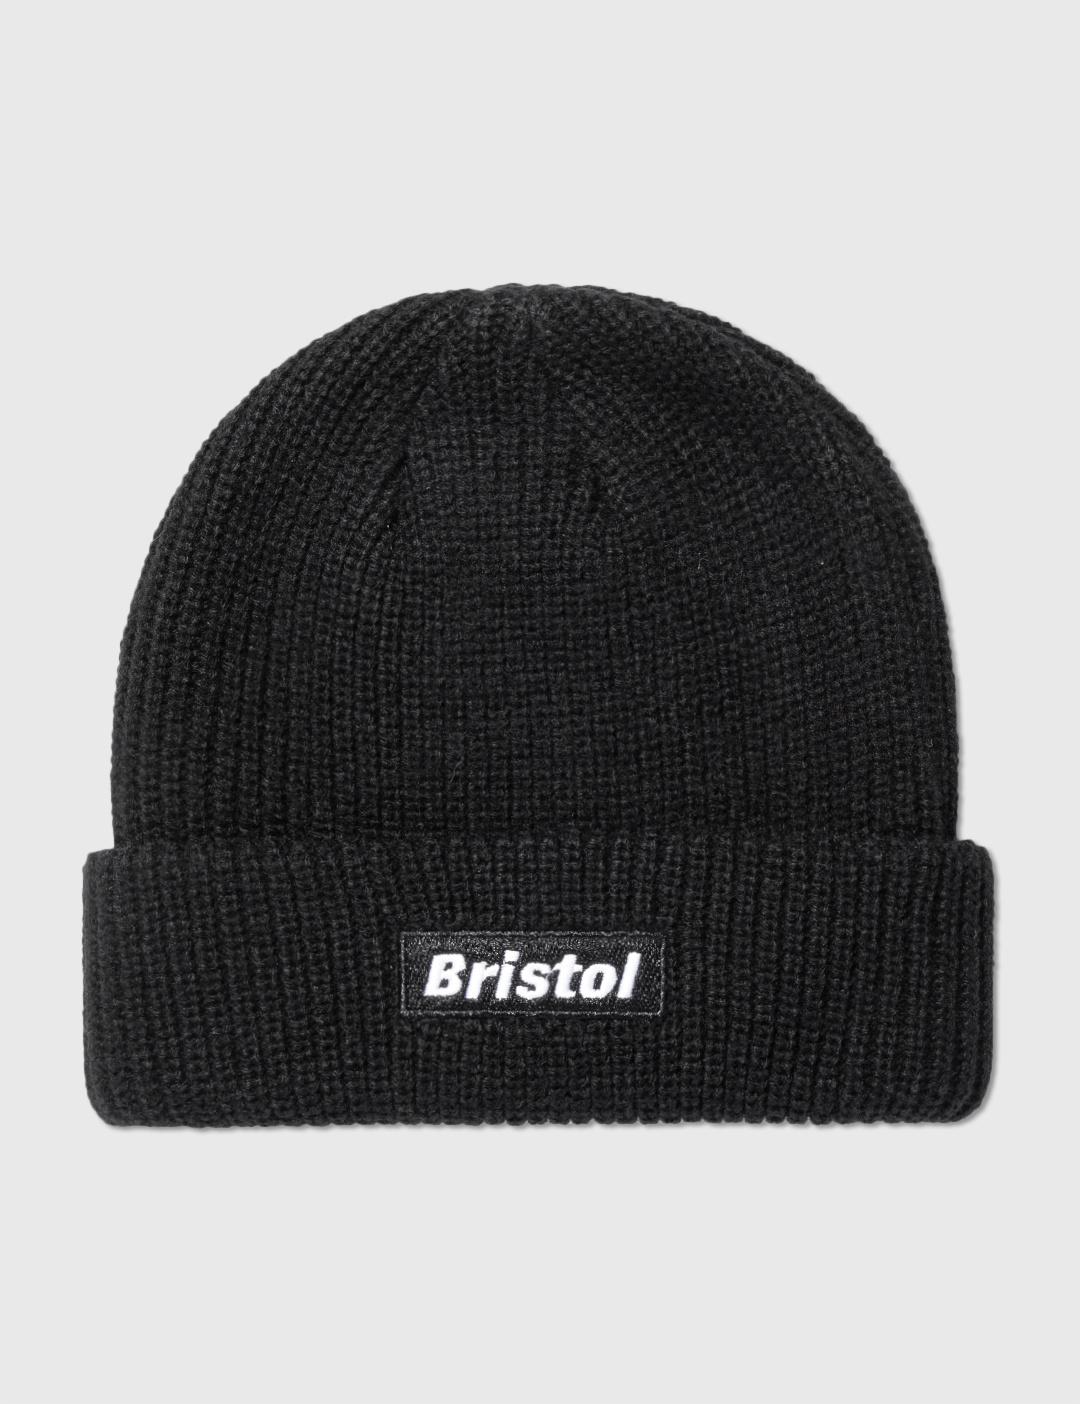 SMALL CLASSIC LOGO BEANIE by F.C. REAL BRISTOL